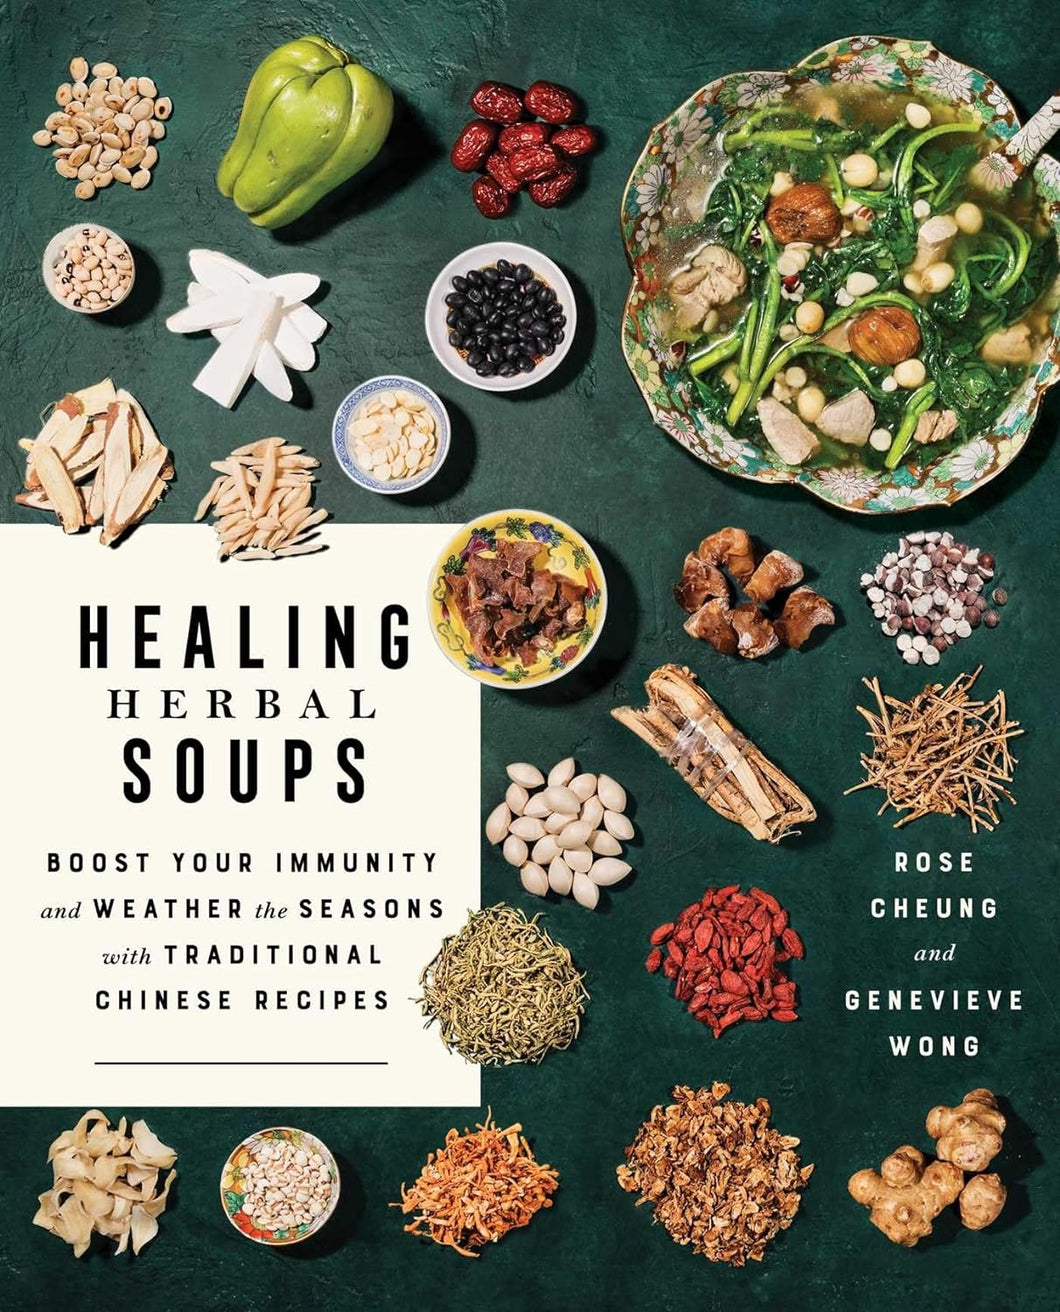 Healing Herbal Soups: Boost Your Immunity and Weather the Seasons with Traditional Chinese Recipes: A Cookbook by Rose Cheung and Genevieve Wong